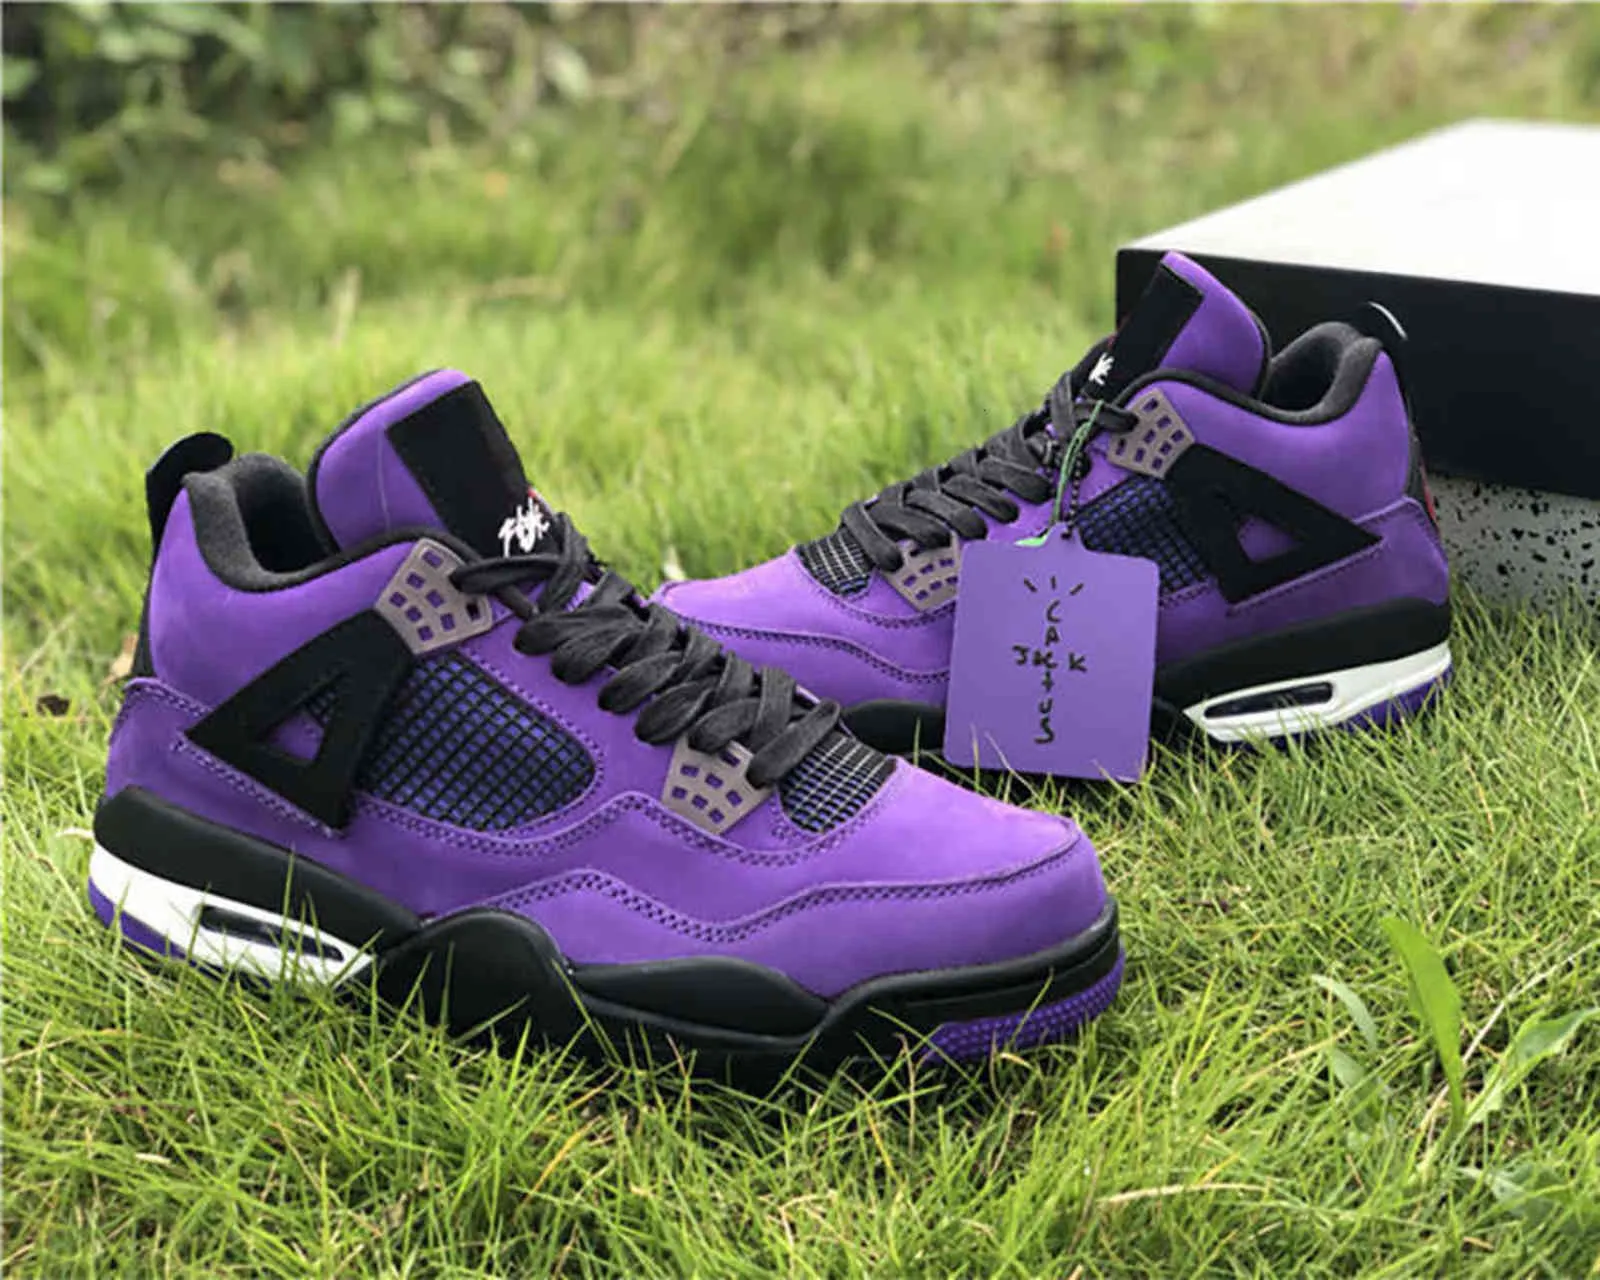 Mens Basketball Shoes Black Purple Men Woman TS Cactus Jack x Jumpman 4 4s outdoor running trainers sport Sneaker With Box